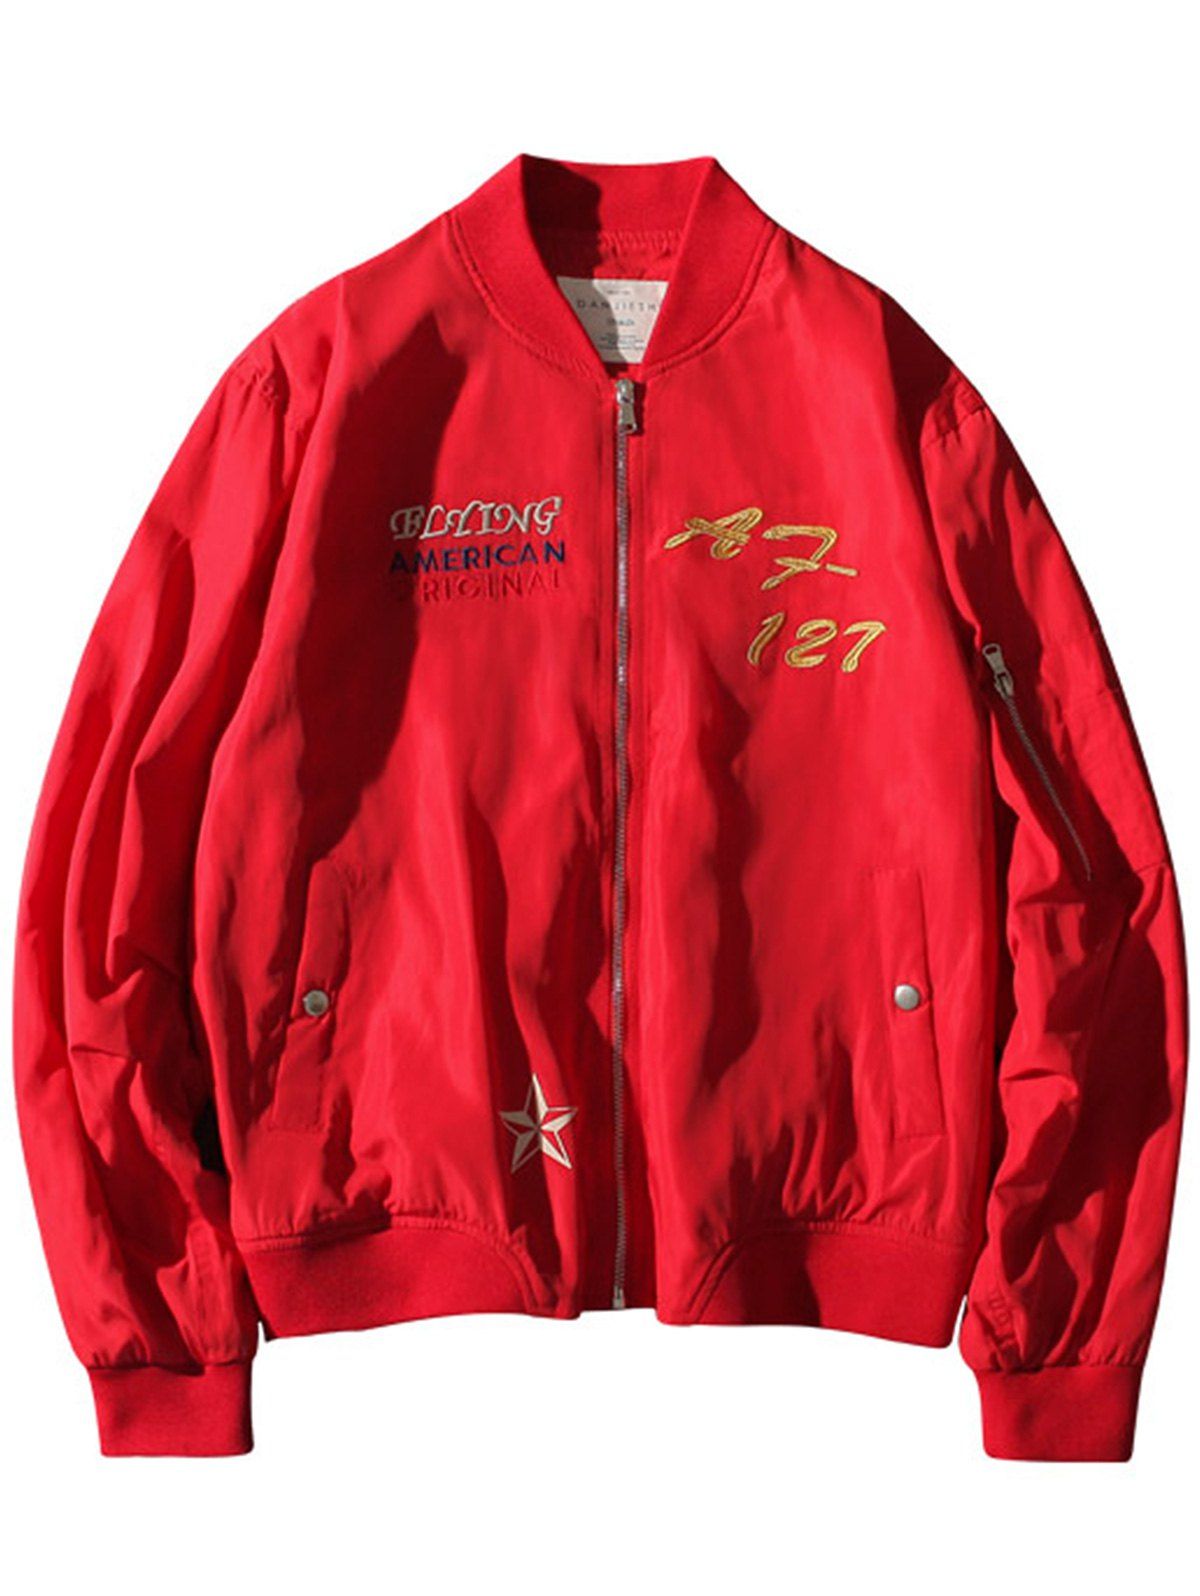 Printed Embroidered Zip Up Bomber Jacket - RED 2XL